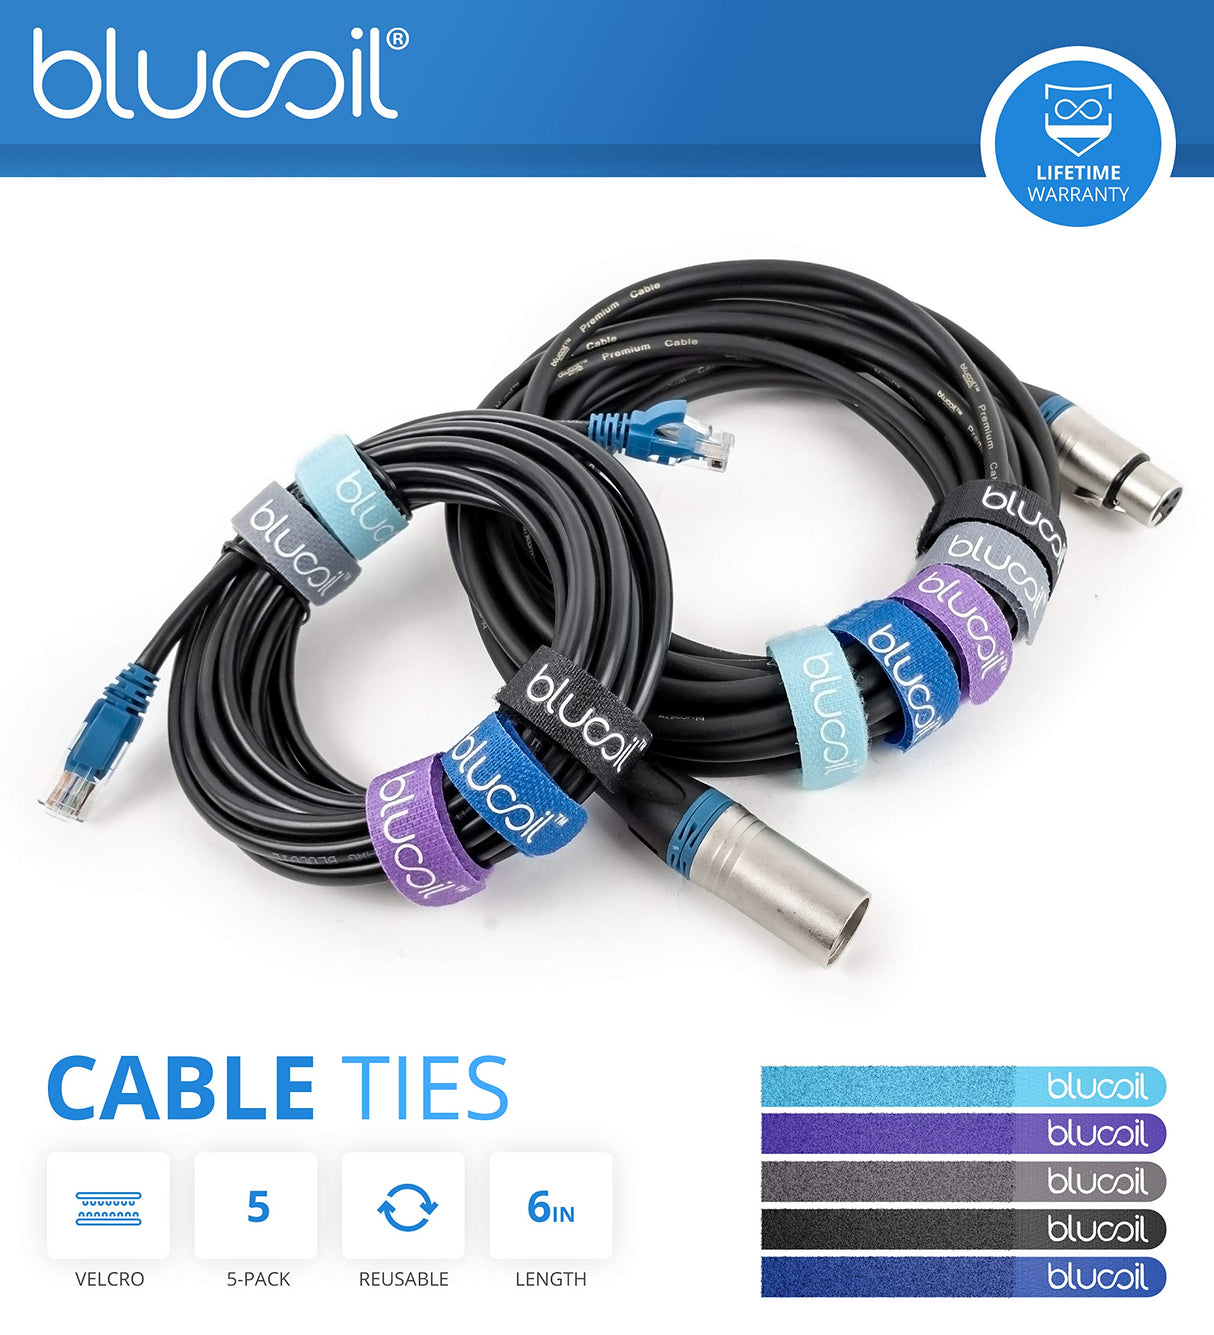 AirTV 2 Dual OTA TV Tuner with Integrated DVR - iOS, Android, Roku Compatible Bundle with Blucoil 2-Way TV Coaxial Cable Splitter, 10-FT Cat5e Cable, and 5X Cable Ties | Bonus $25 Sling TV Credit